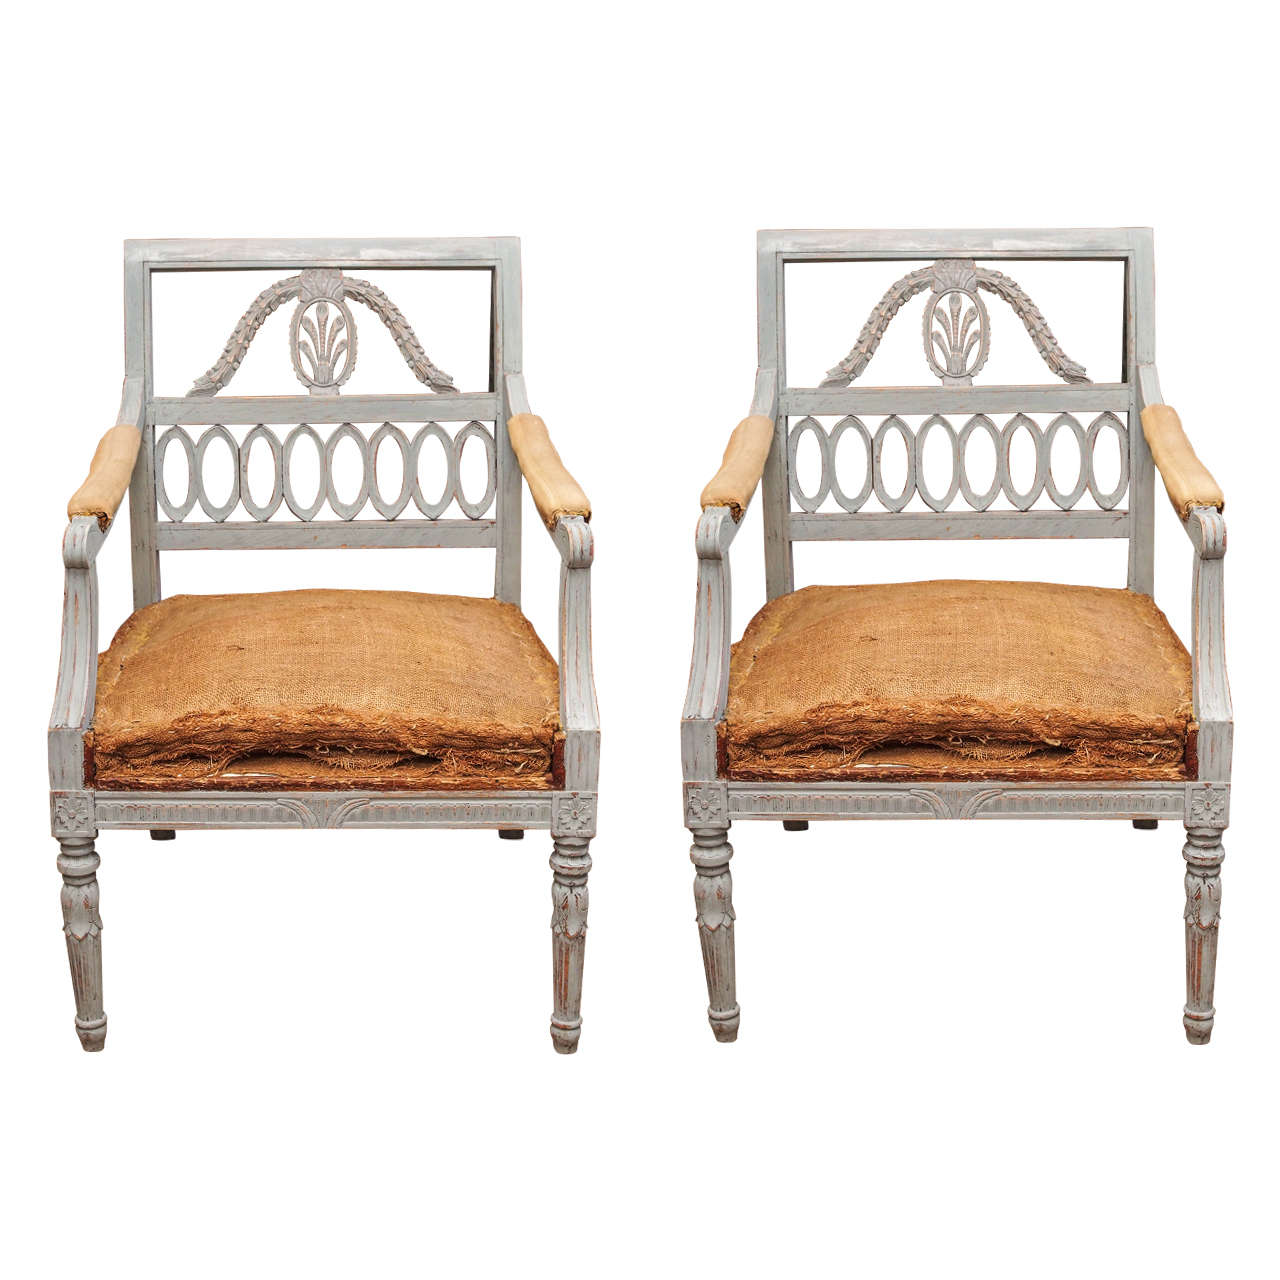 Pair of 18th Century Style Painted Gustavian Armchairs, Sweden